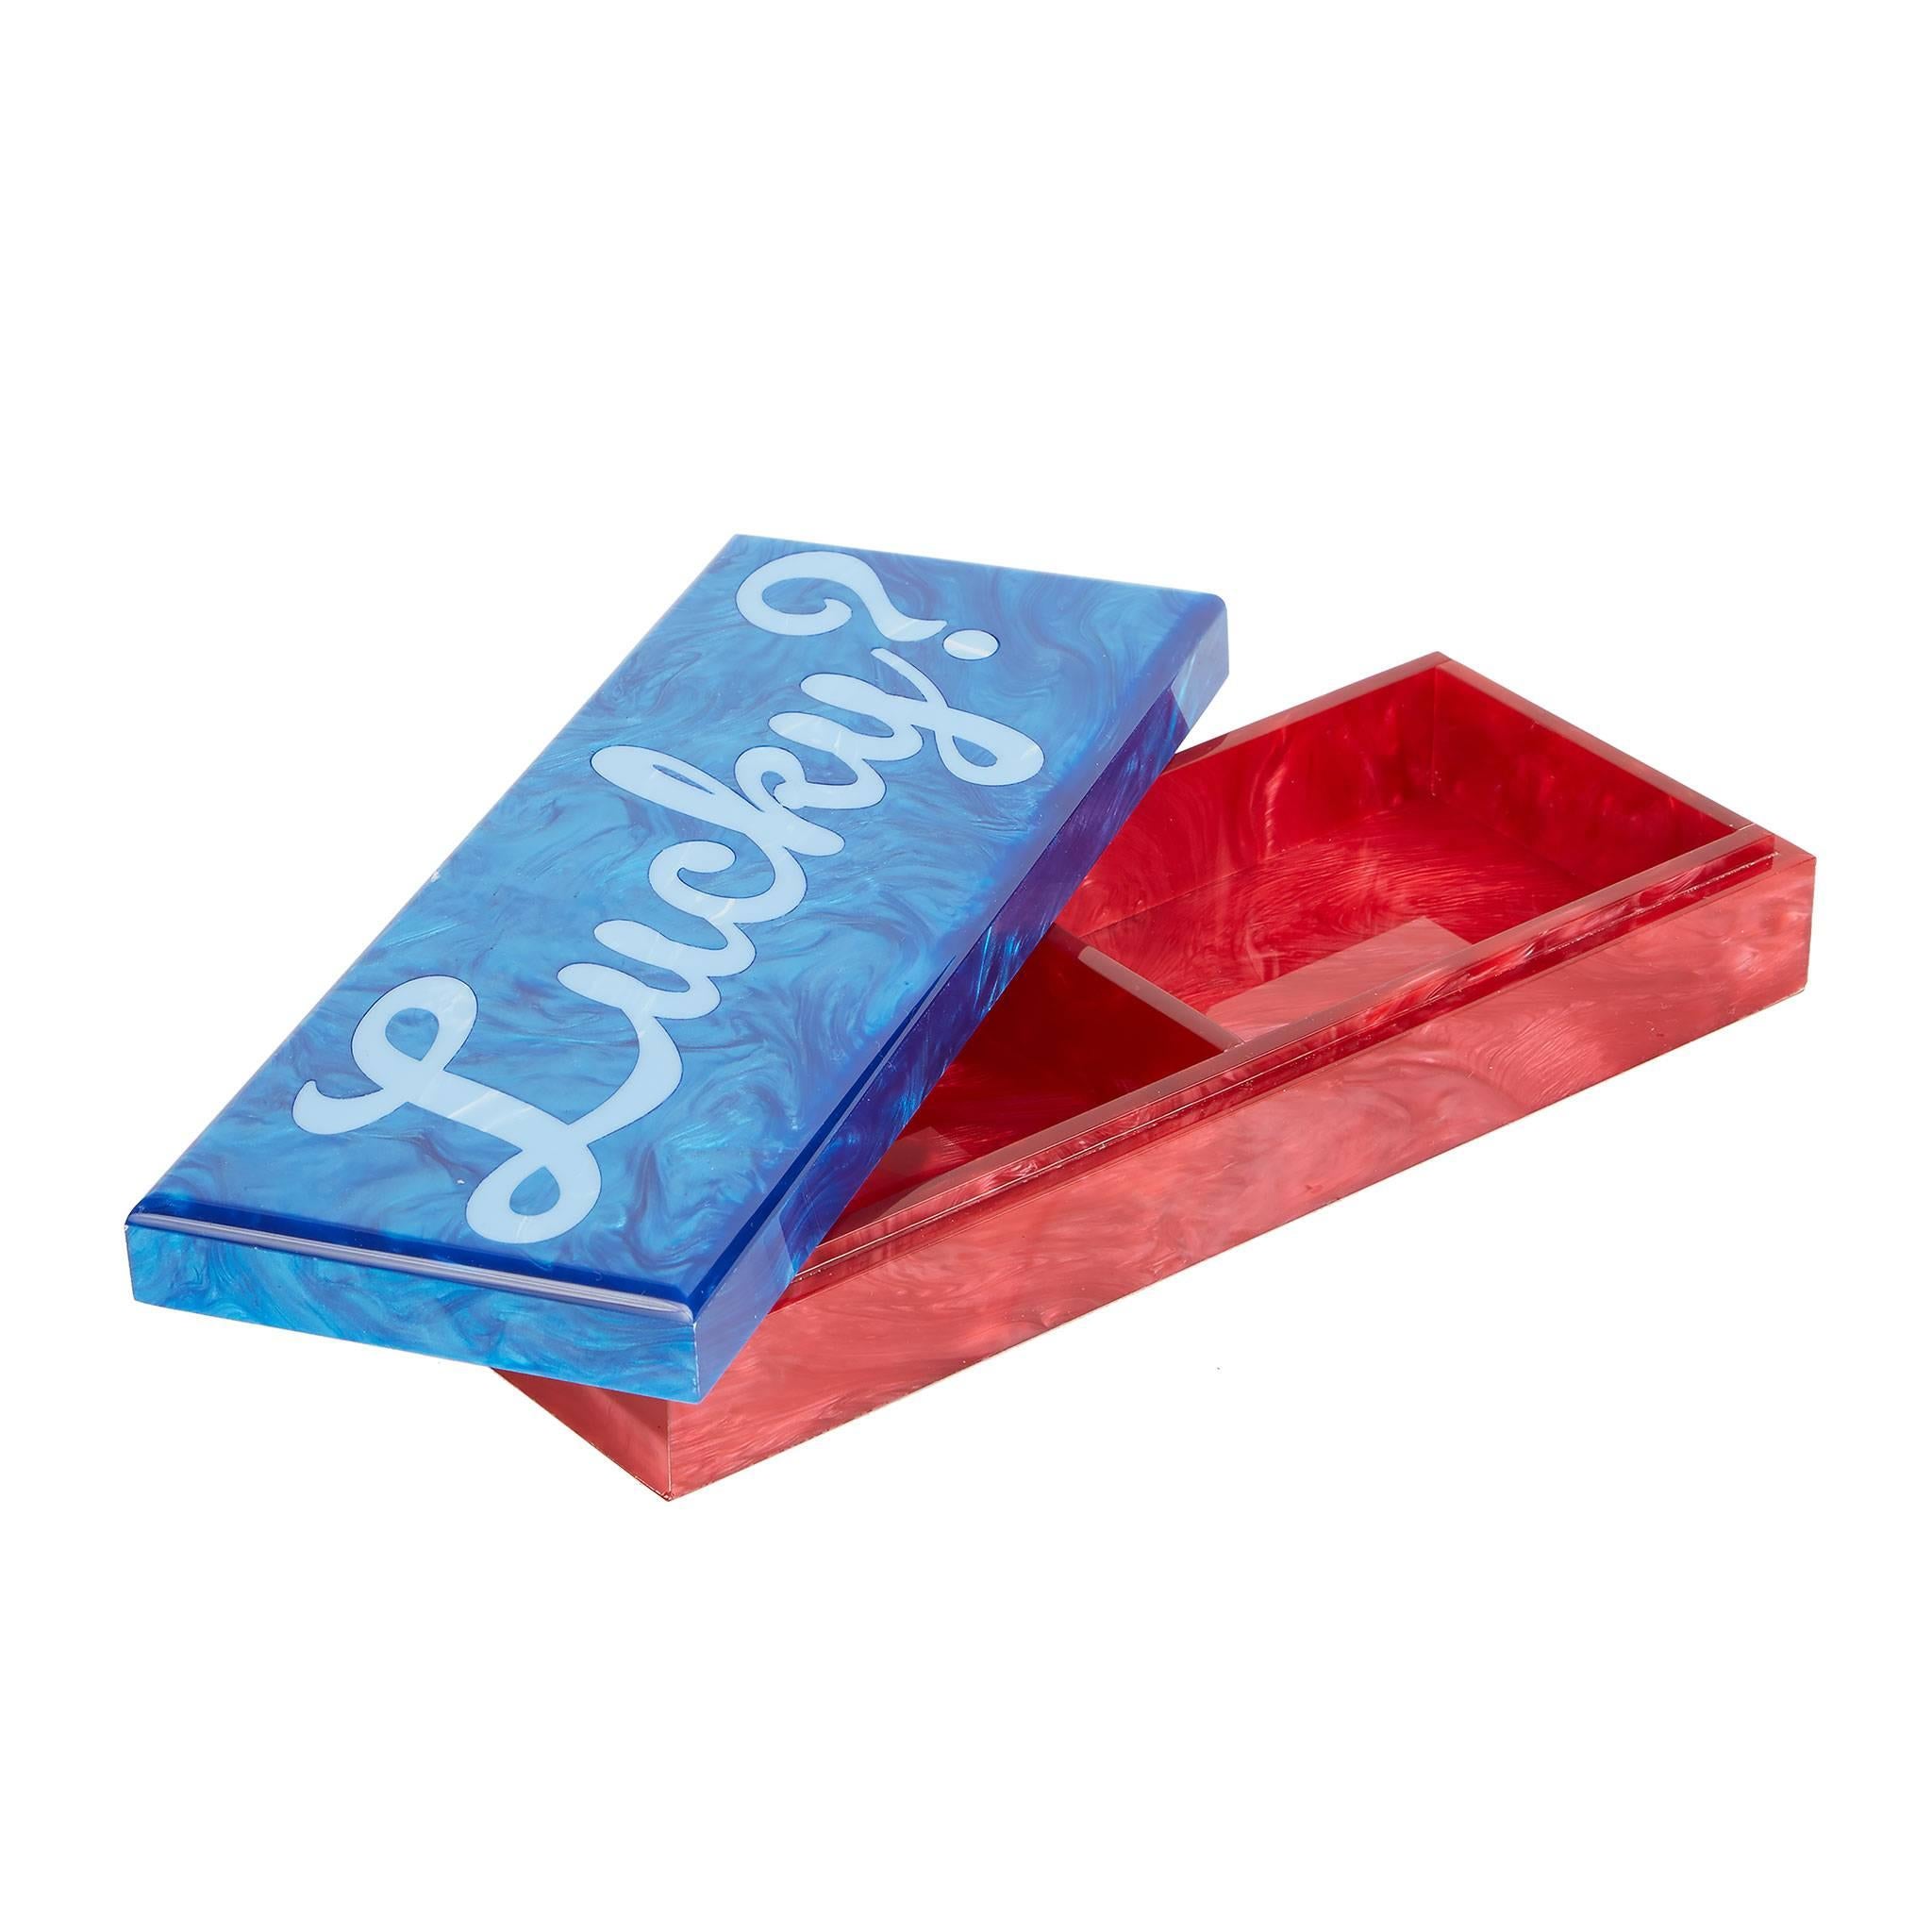 Card box lucky with red pearlescent base and ocean blue lid with light blue script text. 

100% hand poured acrylic
Etched logo at base

Edie Parker products are handcrafted of the finest materials by skilled artisans. Any inconsistencies in